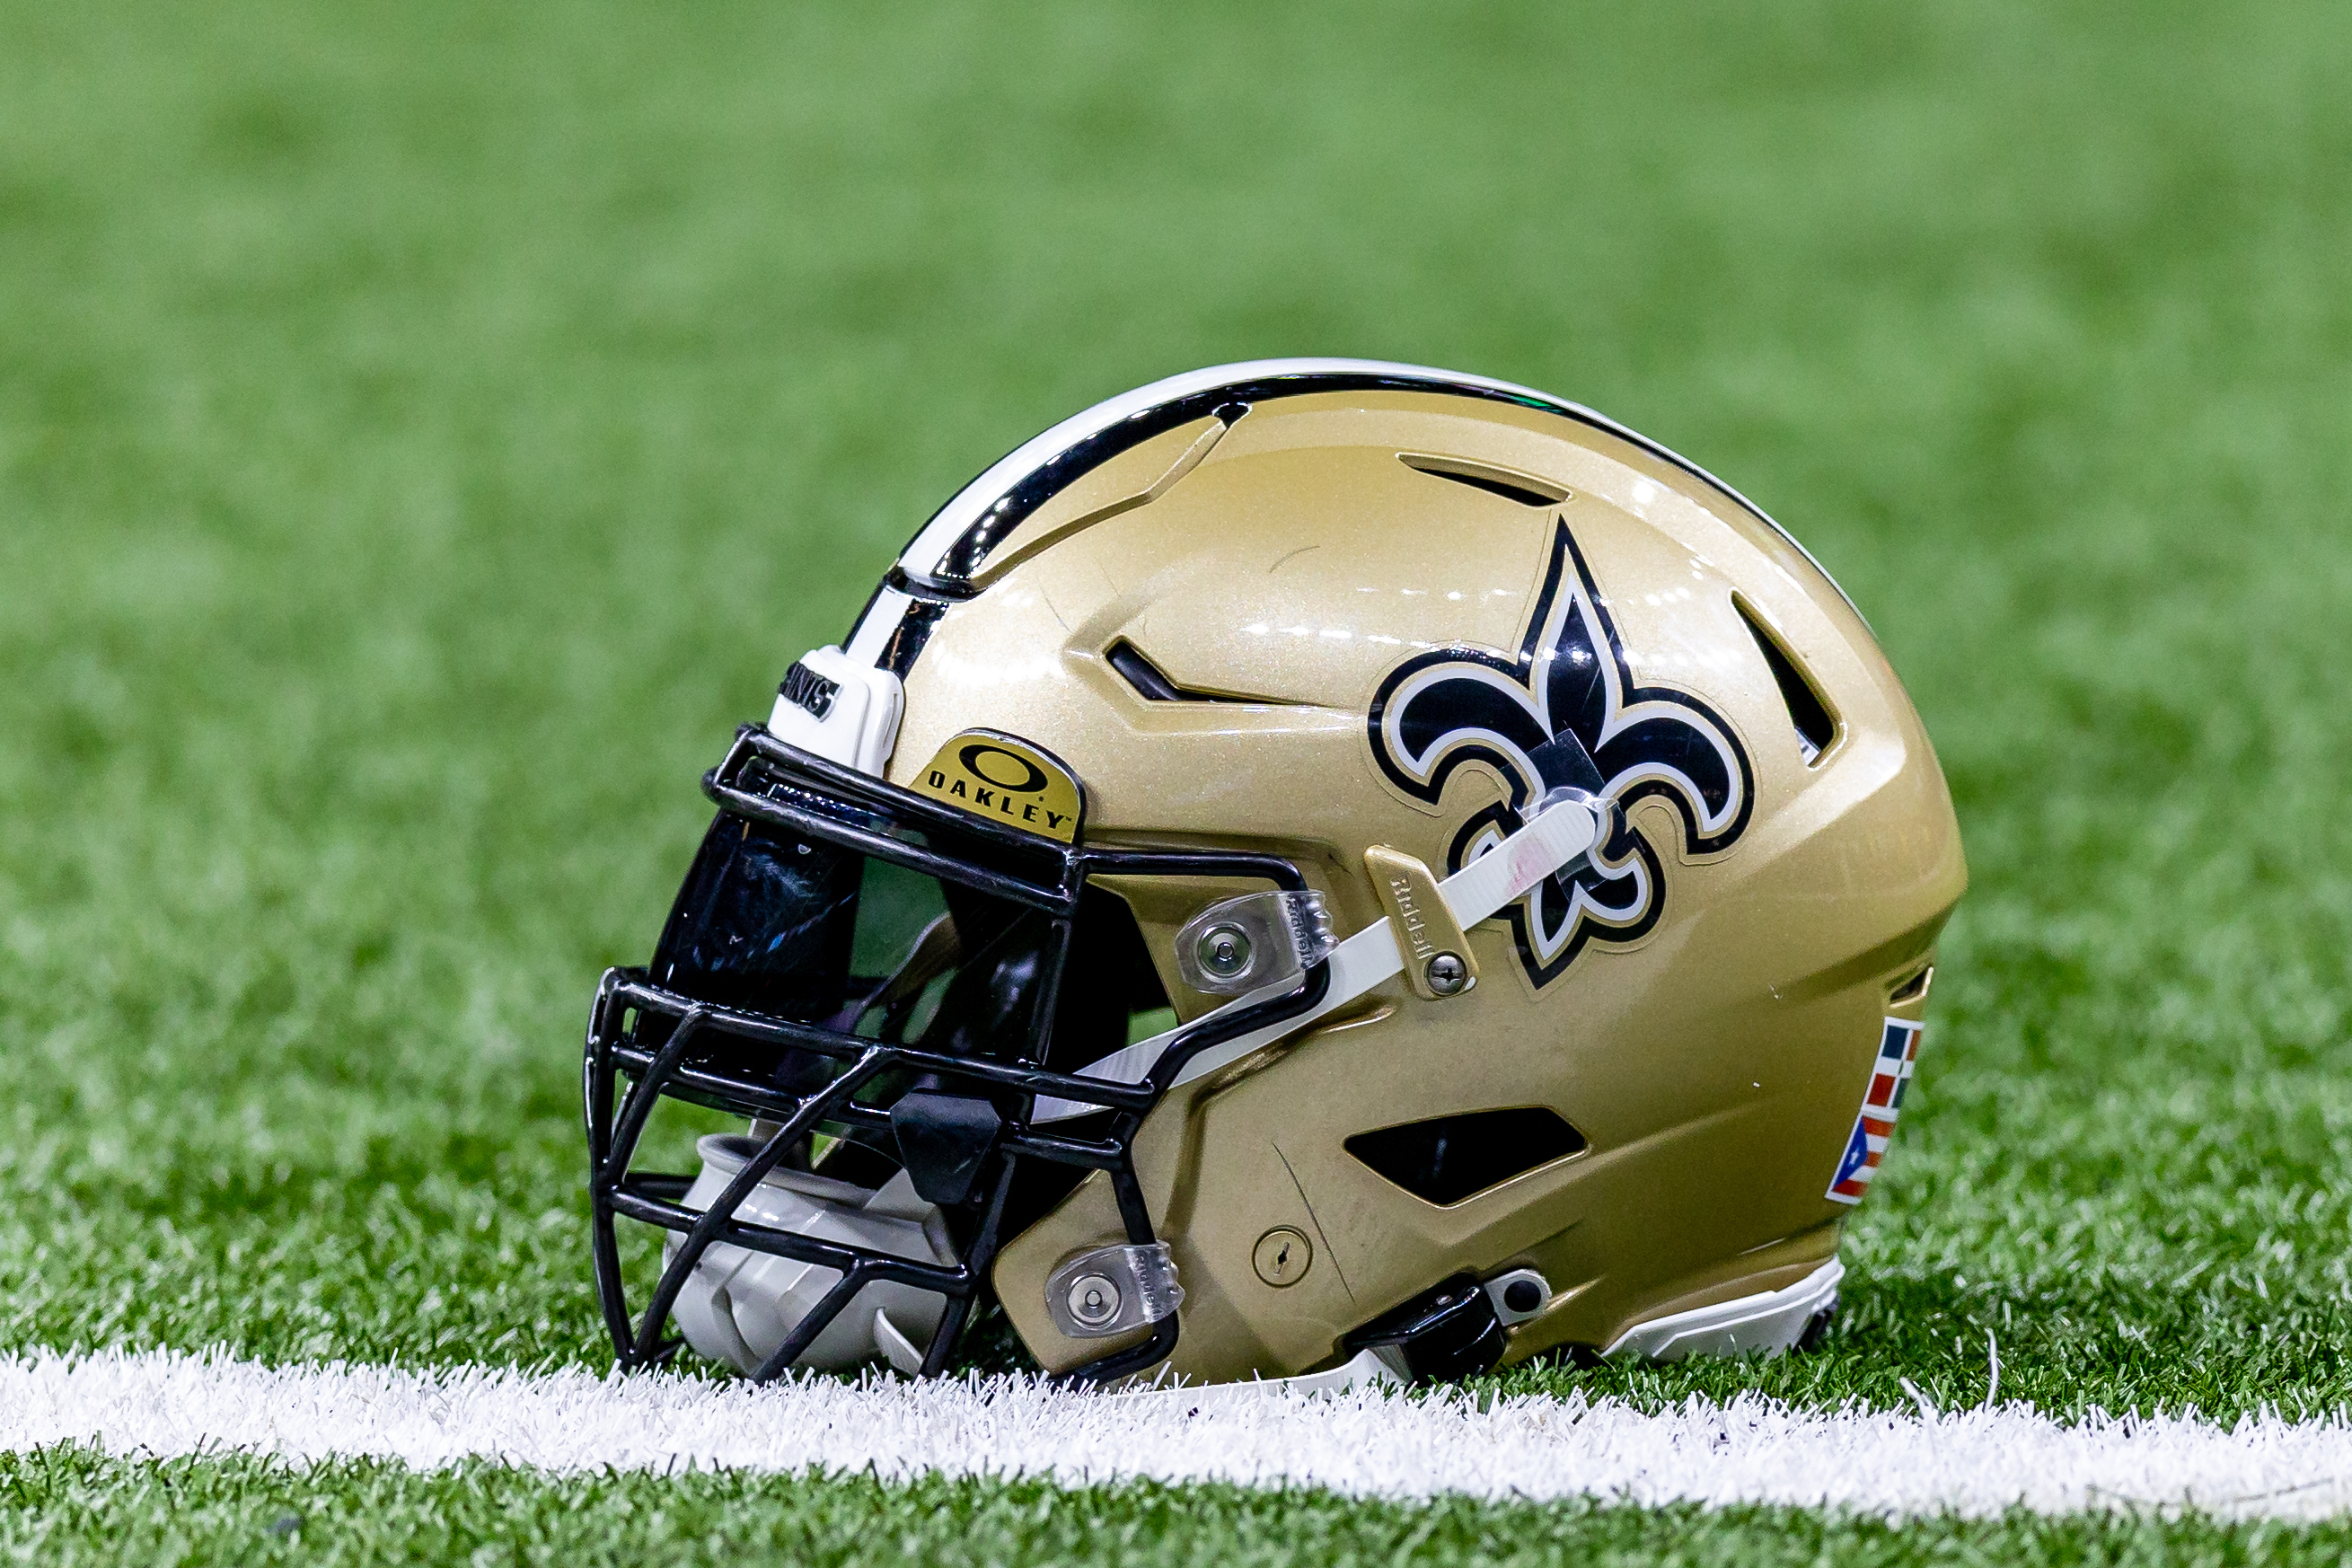 Detailed view of the New Orleans Saints helmet during warmups against the Atlanta Falcons at Caesars Superdome.